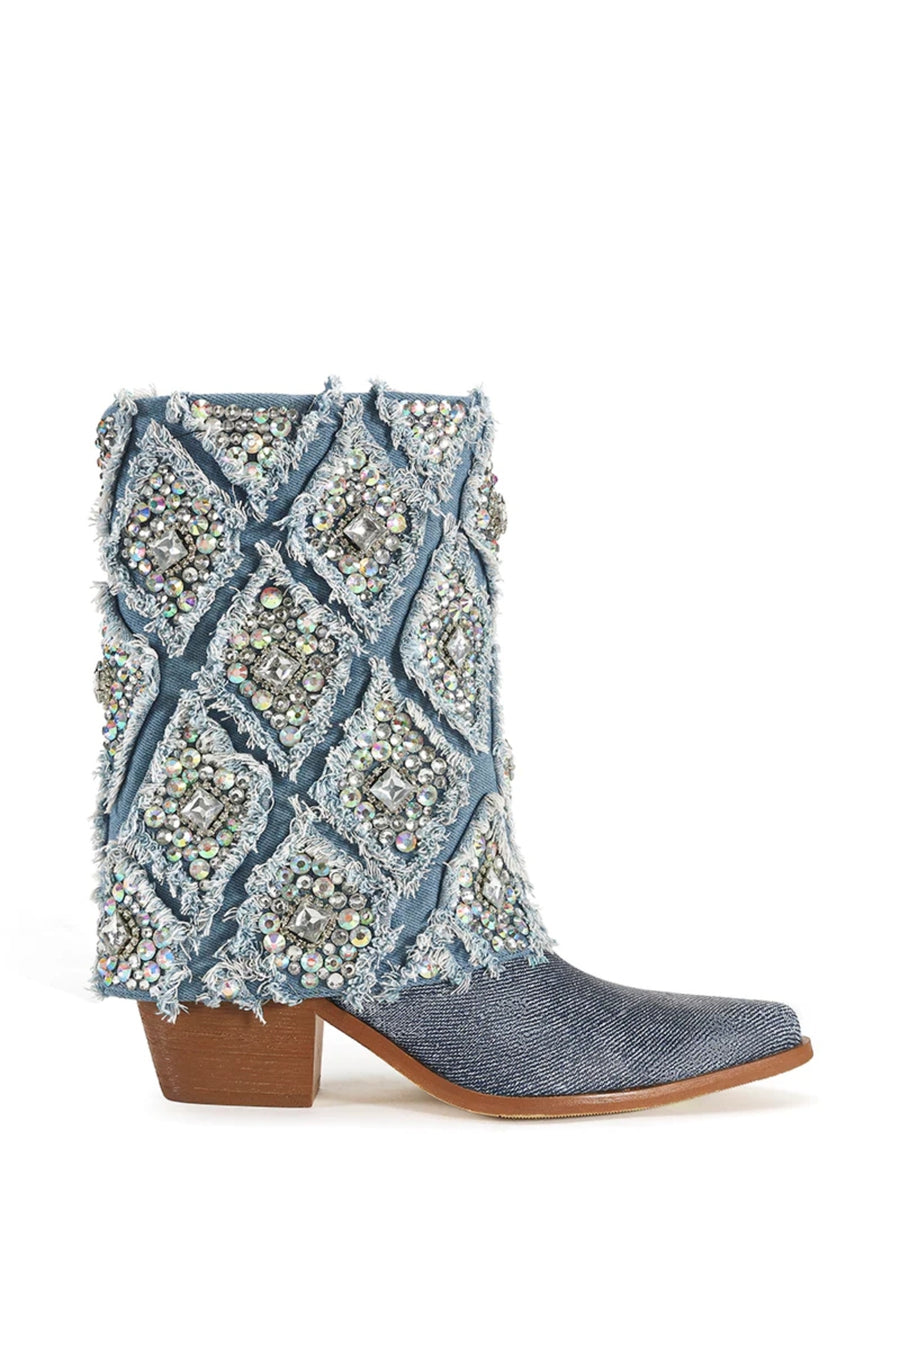 denim statement western boot with a patterned, rhinestone embellished distressed denim  fold over accent 